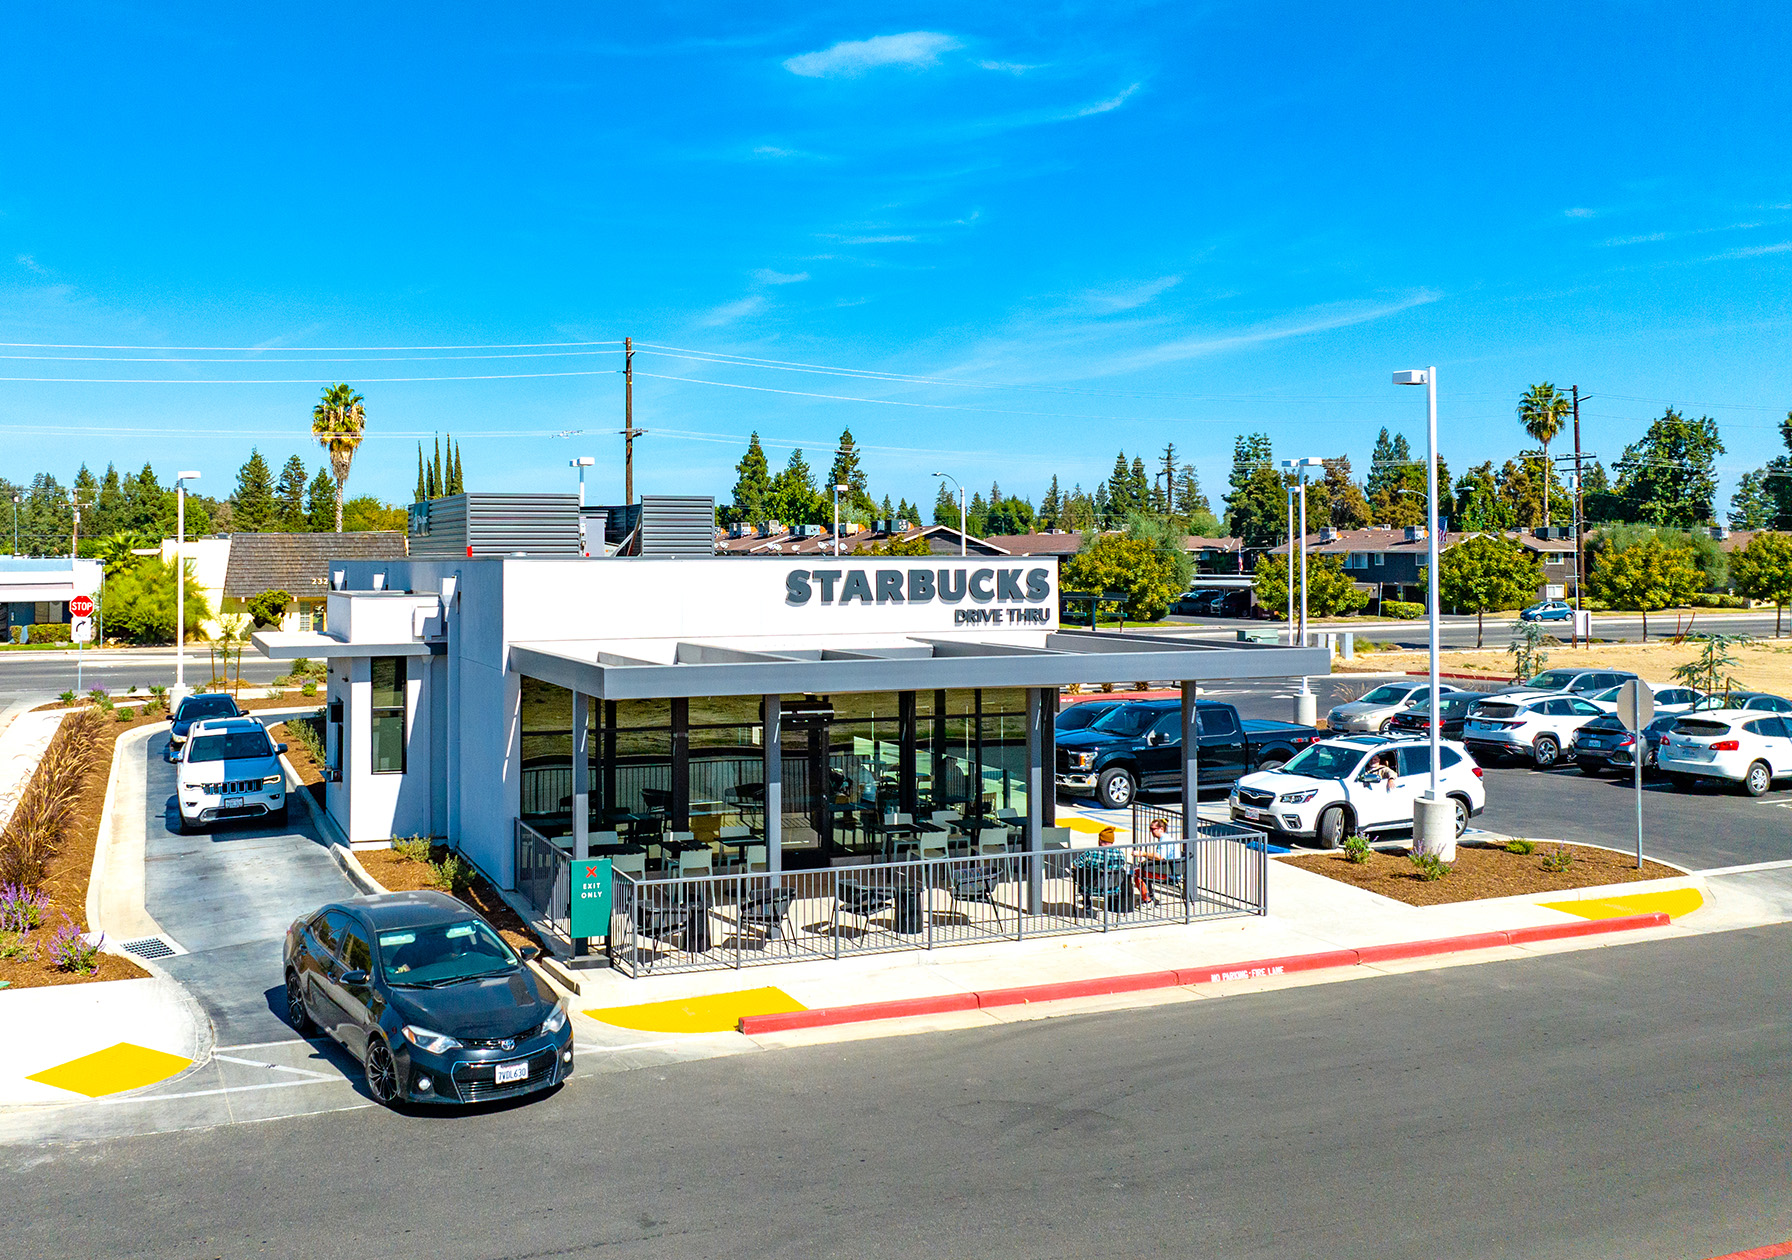 Hanley Investment Group Arranges Sale of New Construction Starbucks Drive-Thru in California’s Central Valley for $3.4 Million, $1,700 PSF